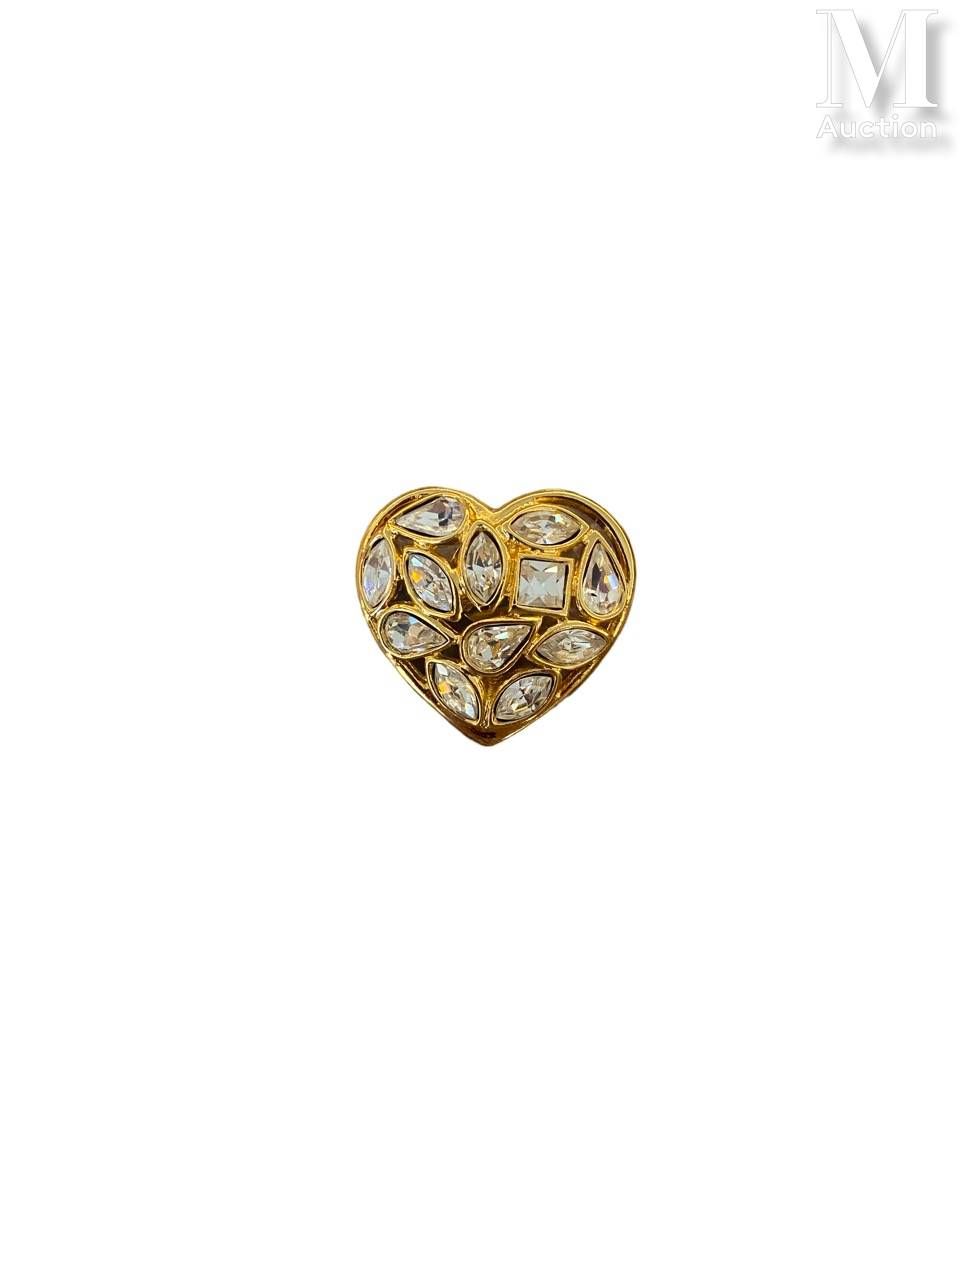 YVES SAINT LAURENT - 1980/90's Pin's
in gilded metal, rhinestone cabochons
Siglé&hellip;